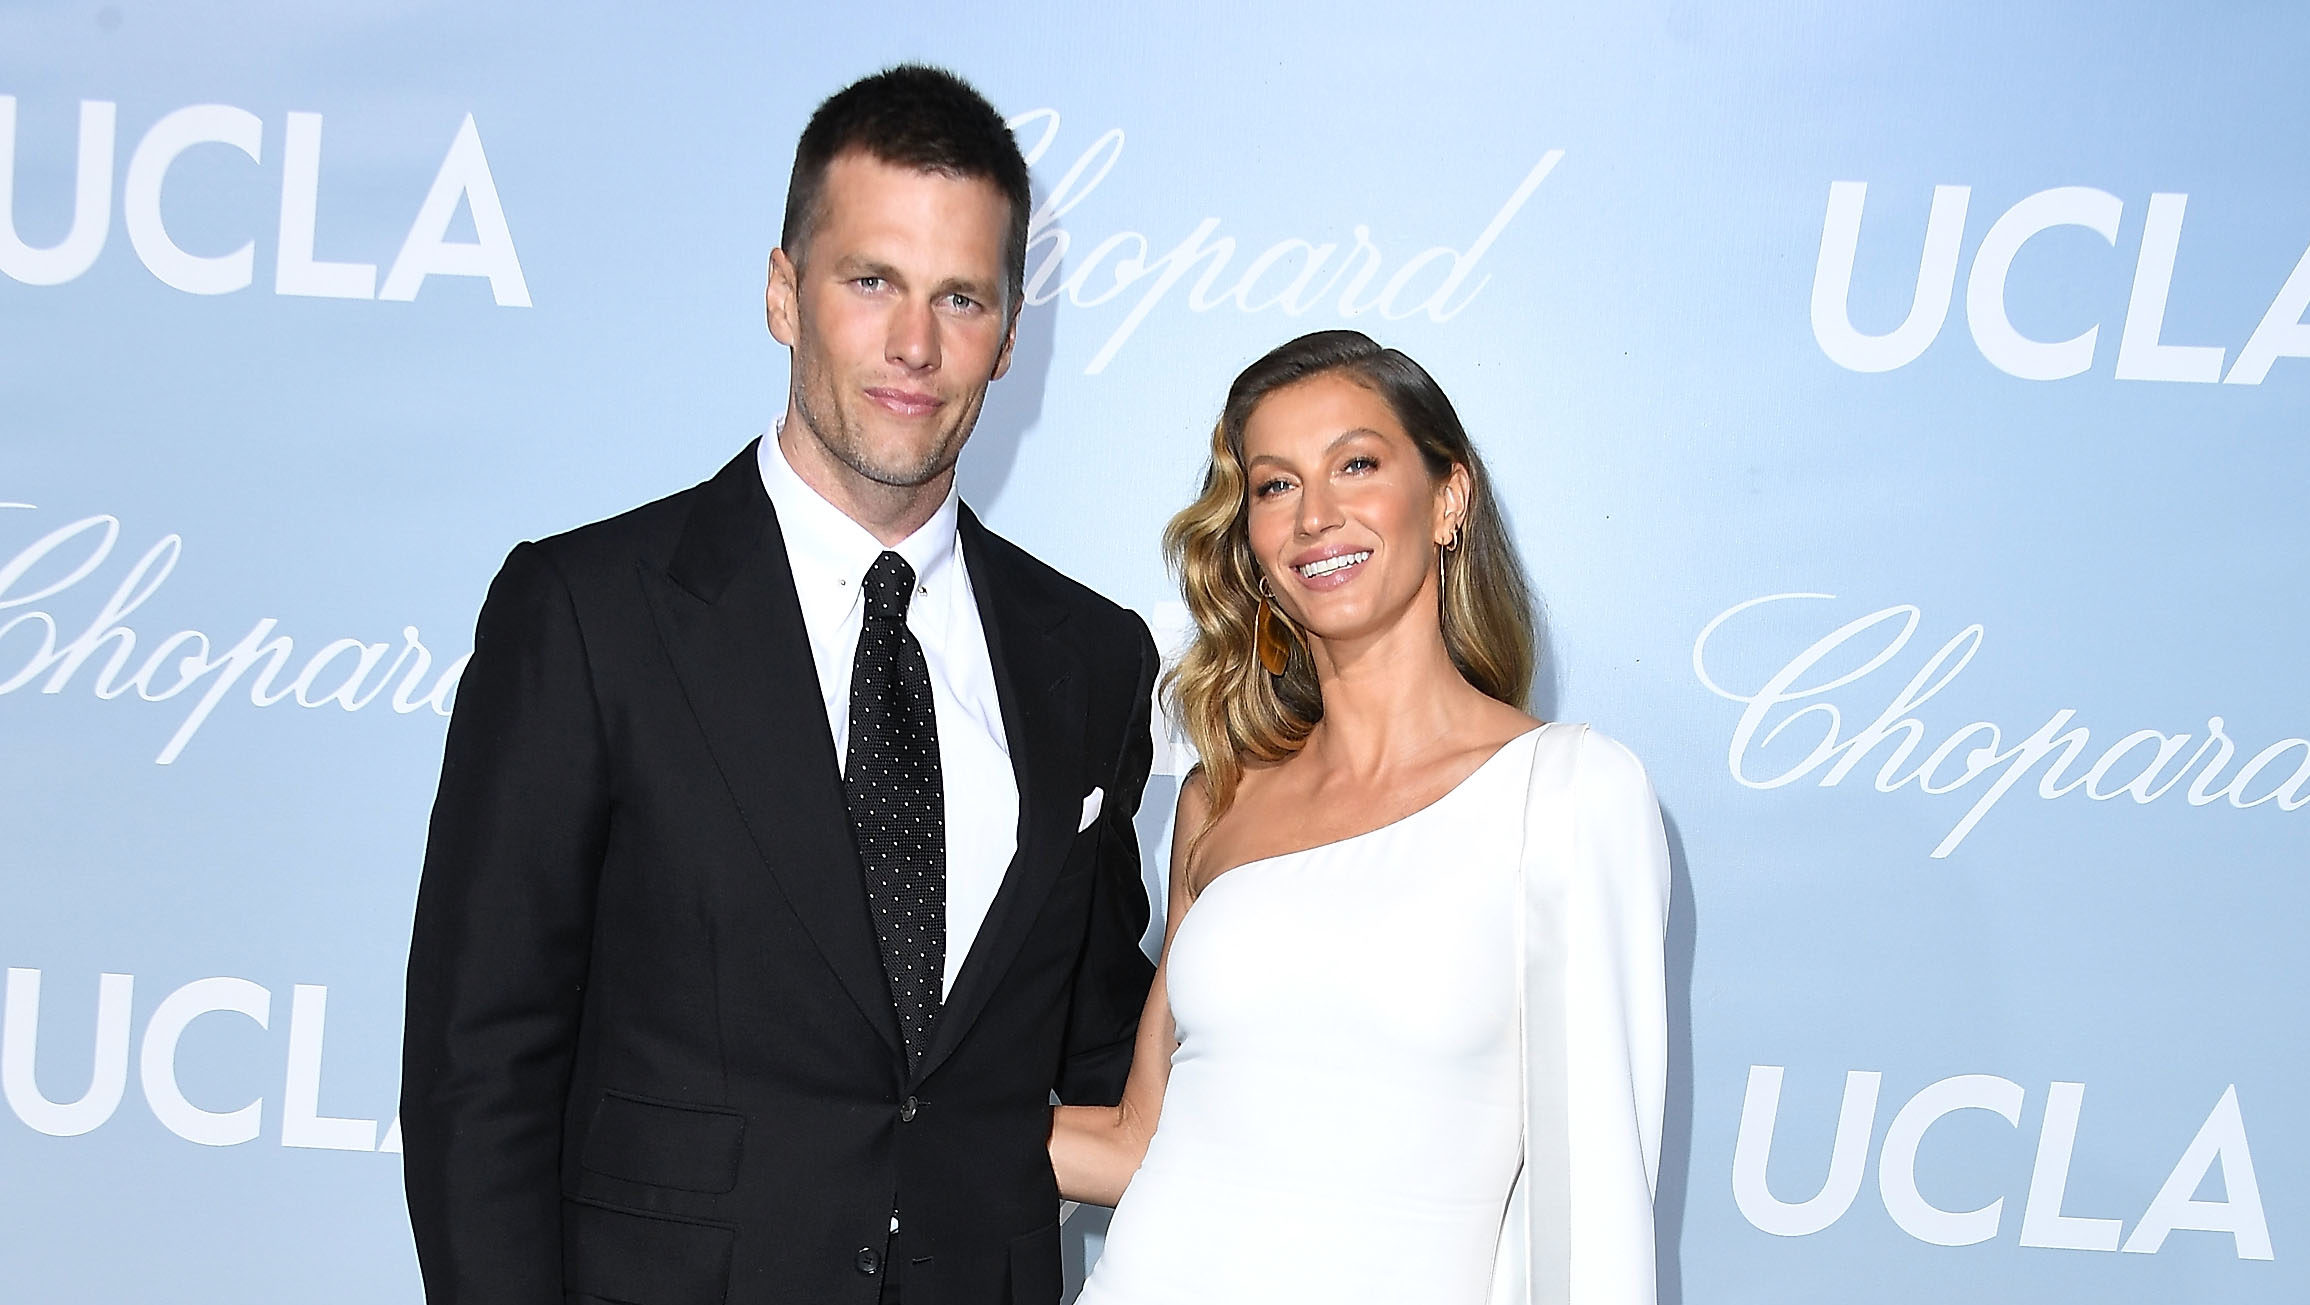 FTX's Big Year Gets Even Bigger With Tom Brady, Gisele ...